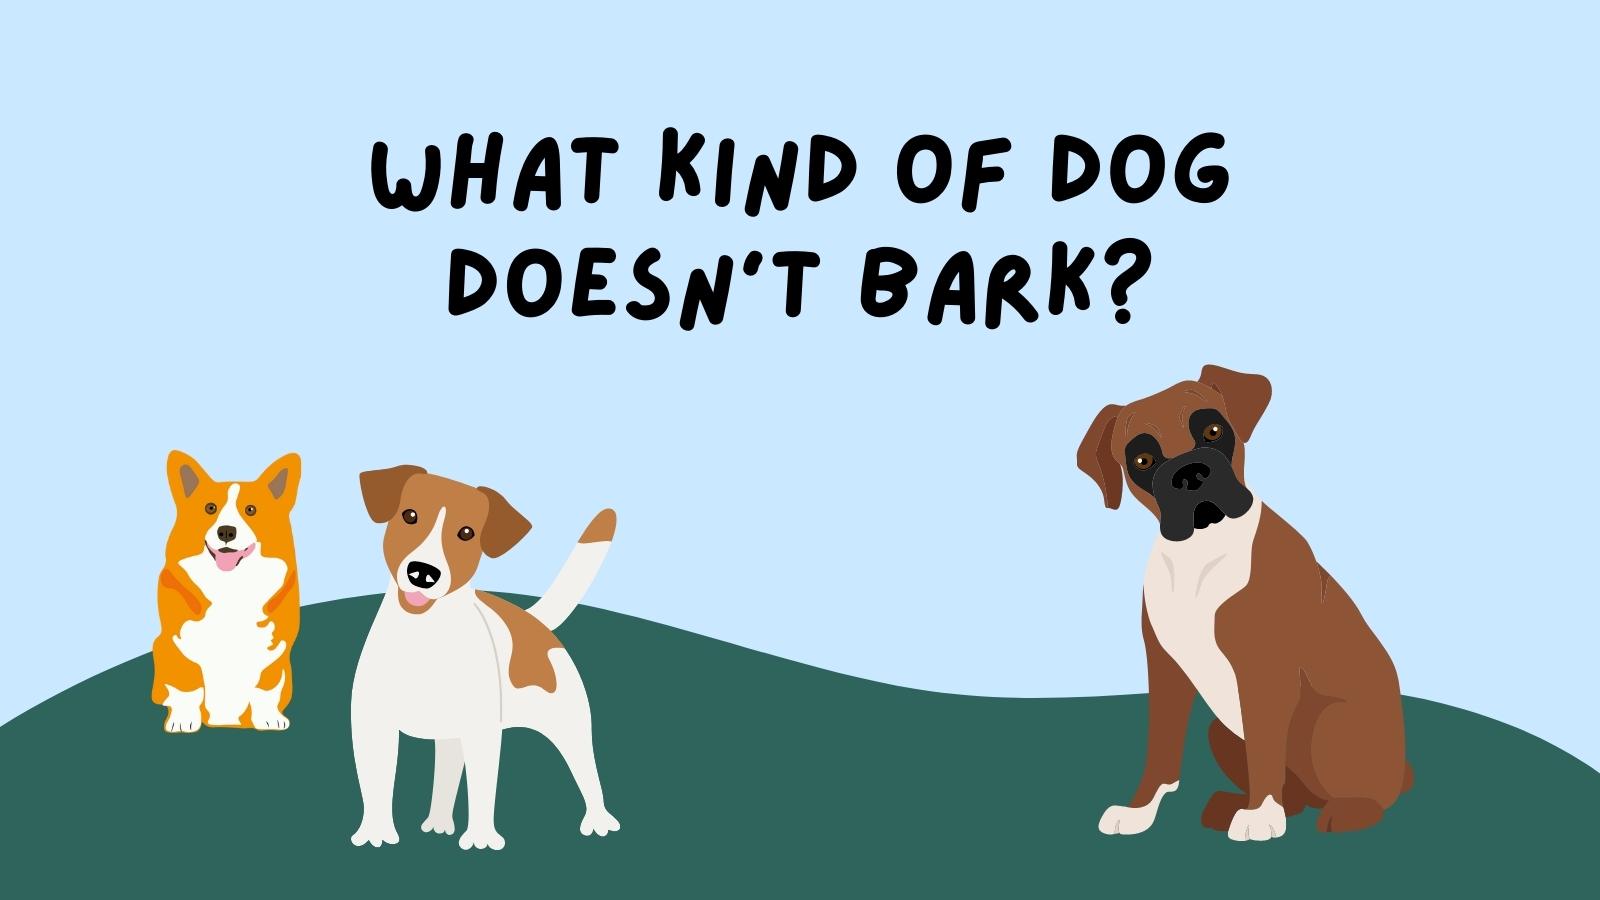 What kind of dog doesn't bark?